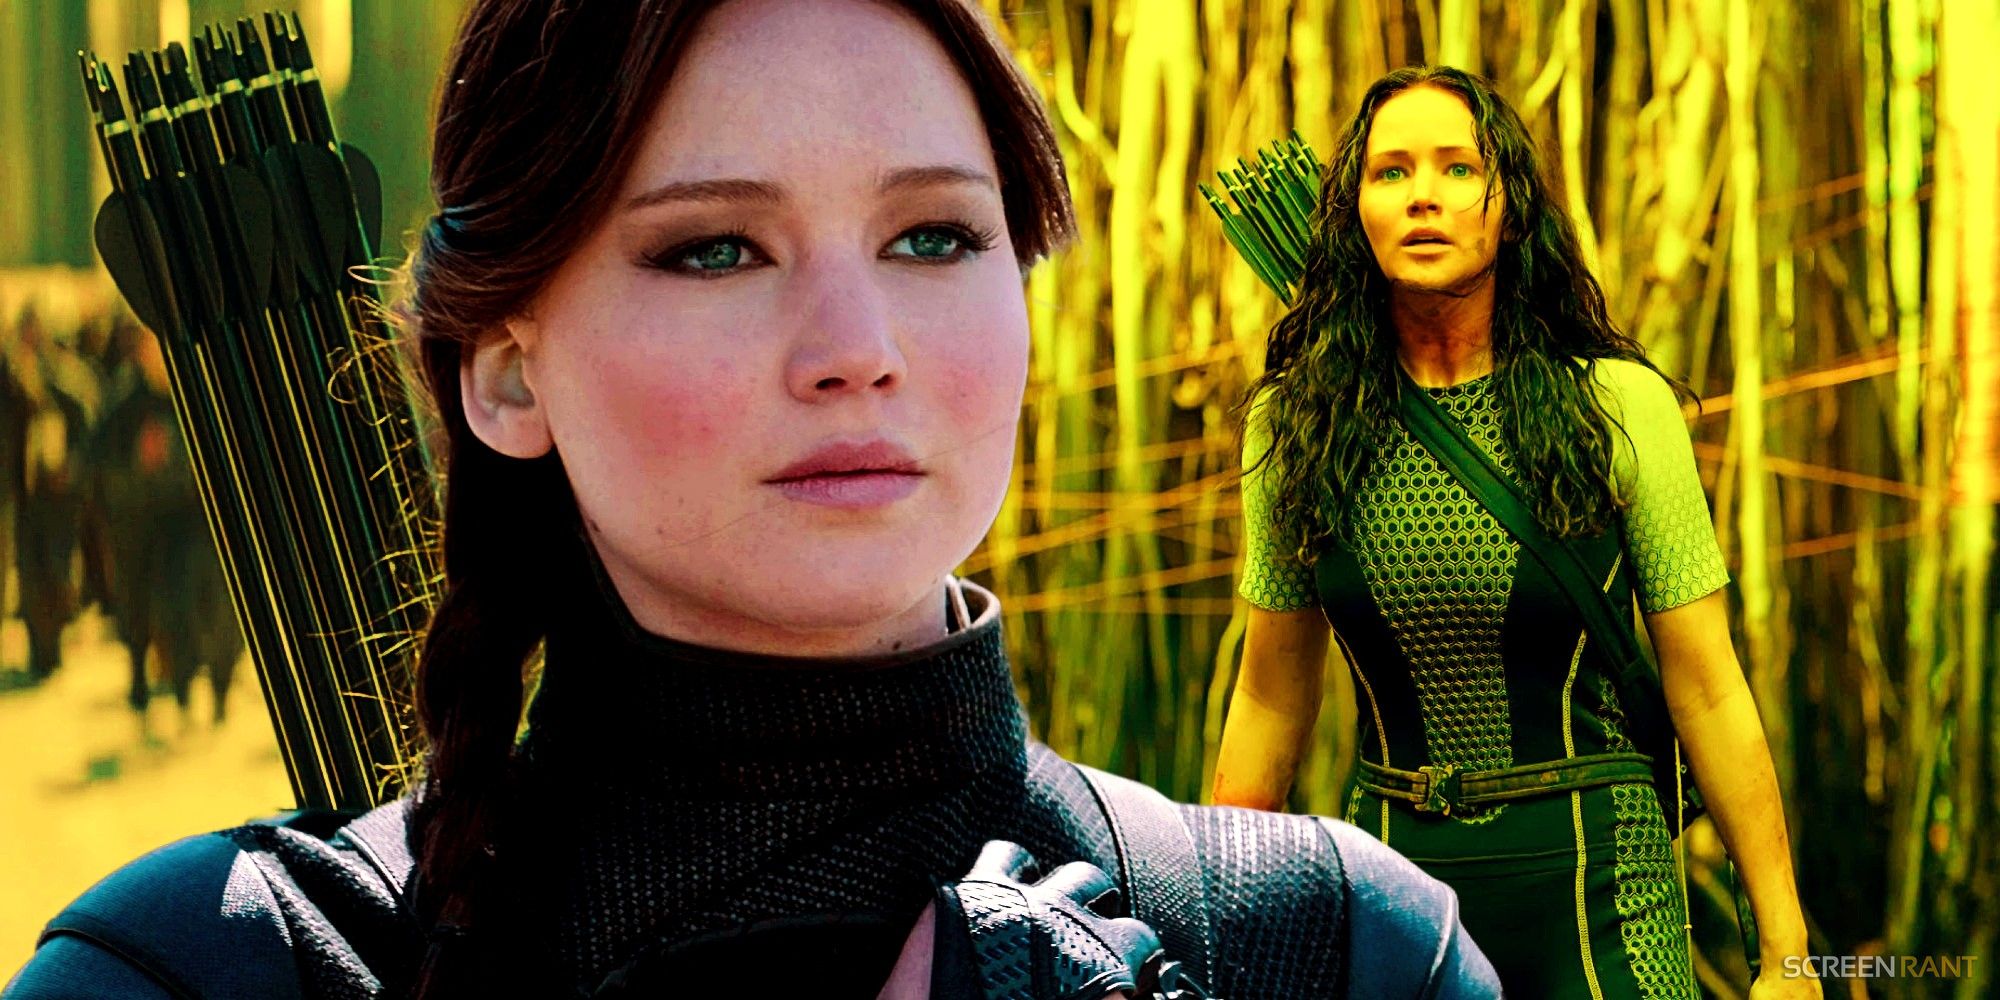 Katniss in Hunger Games Mockingjay Part 2 and Katniss in Catching Fire's games